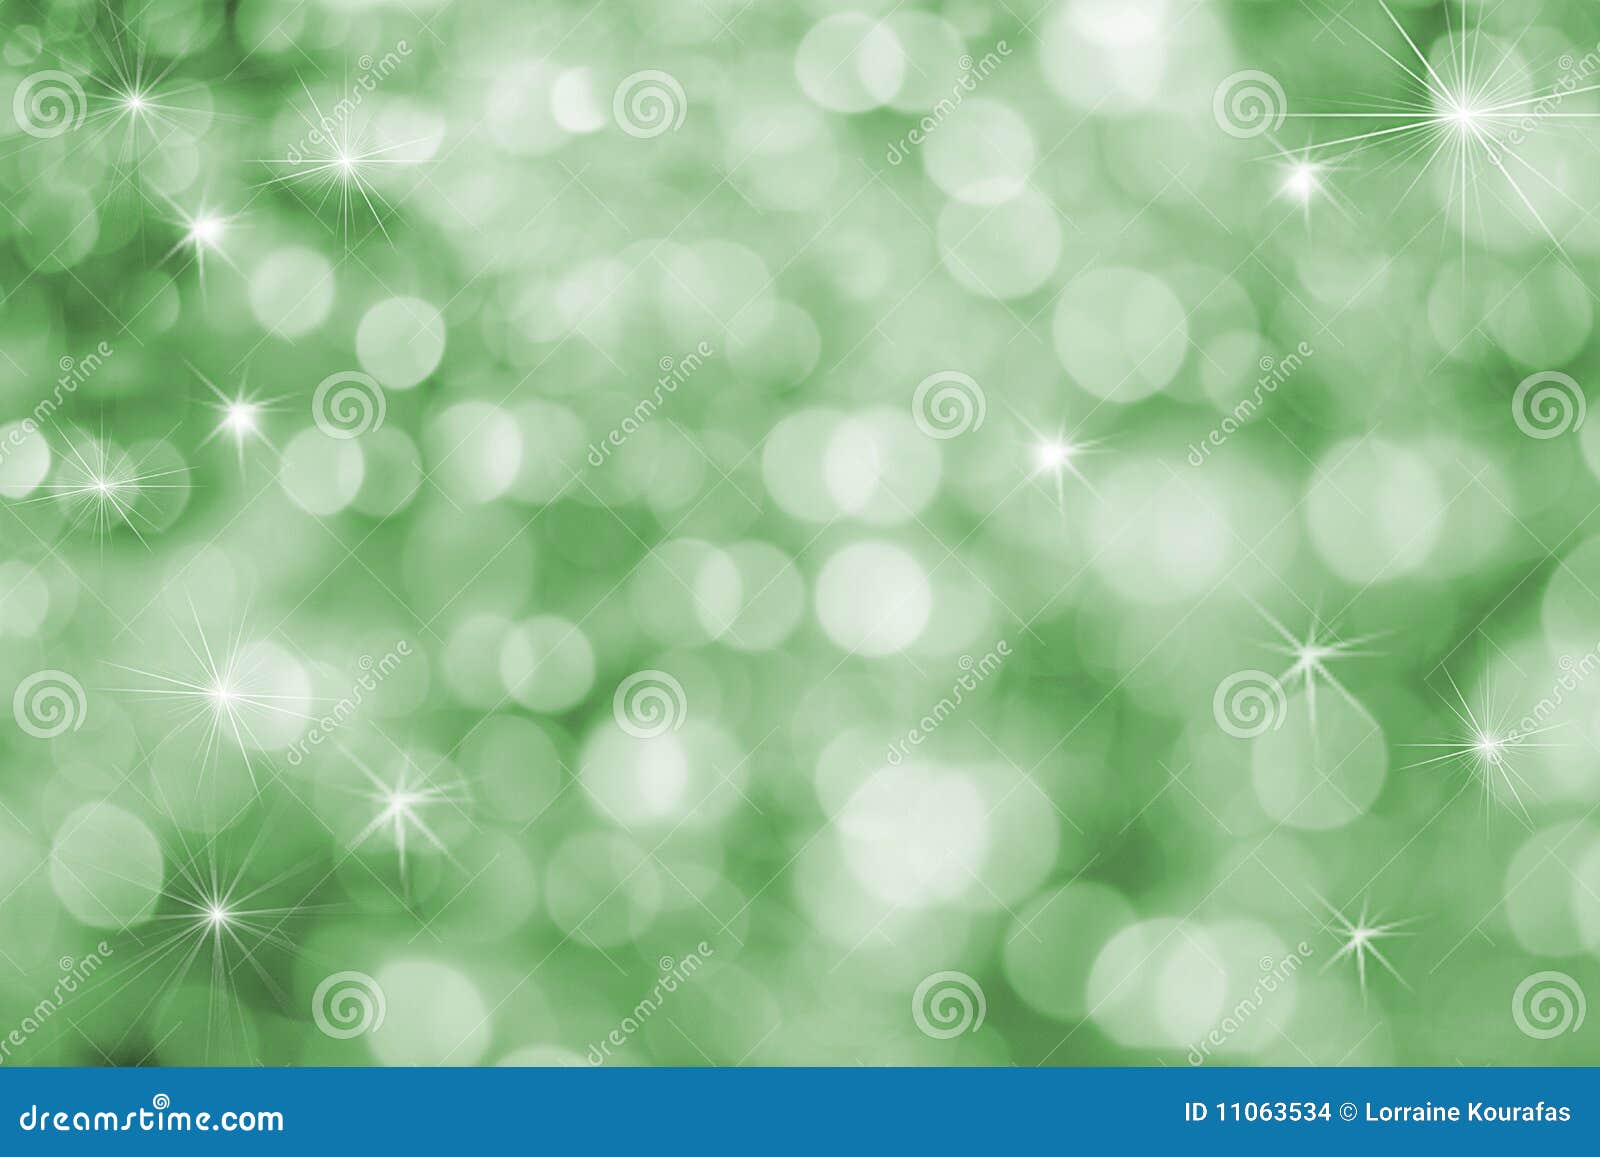 Fun Vibrant Green Holiday Background Stock Photo - Image of ...